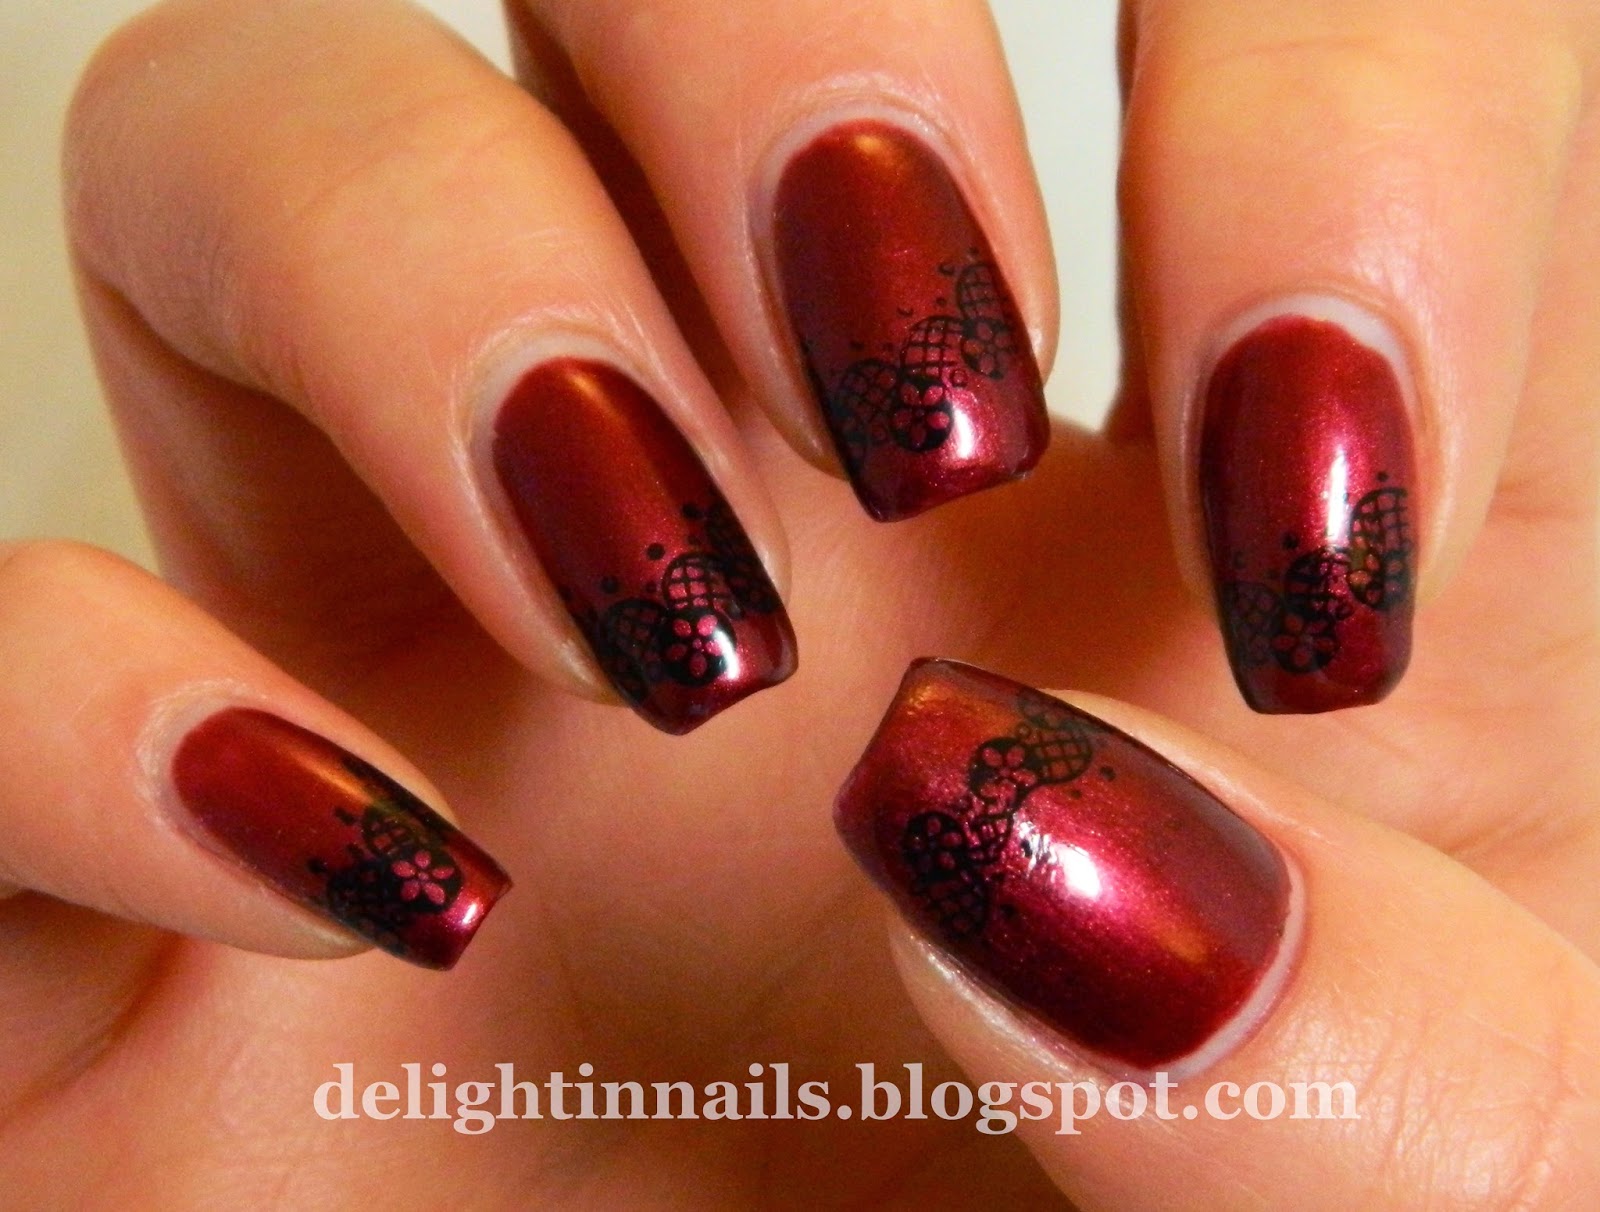 Delight In Nails: Stamping With My Oldest Untried Plate - Konad